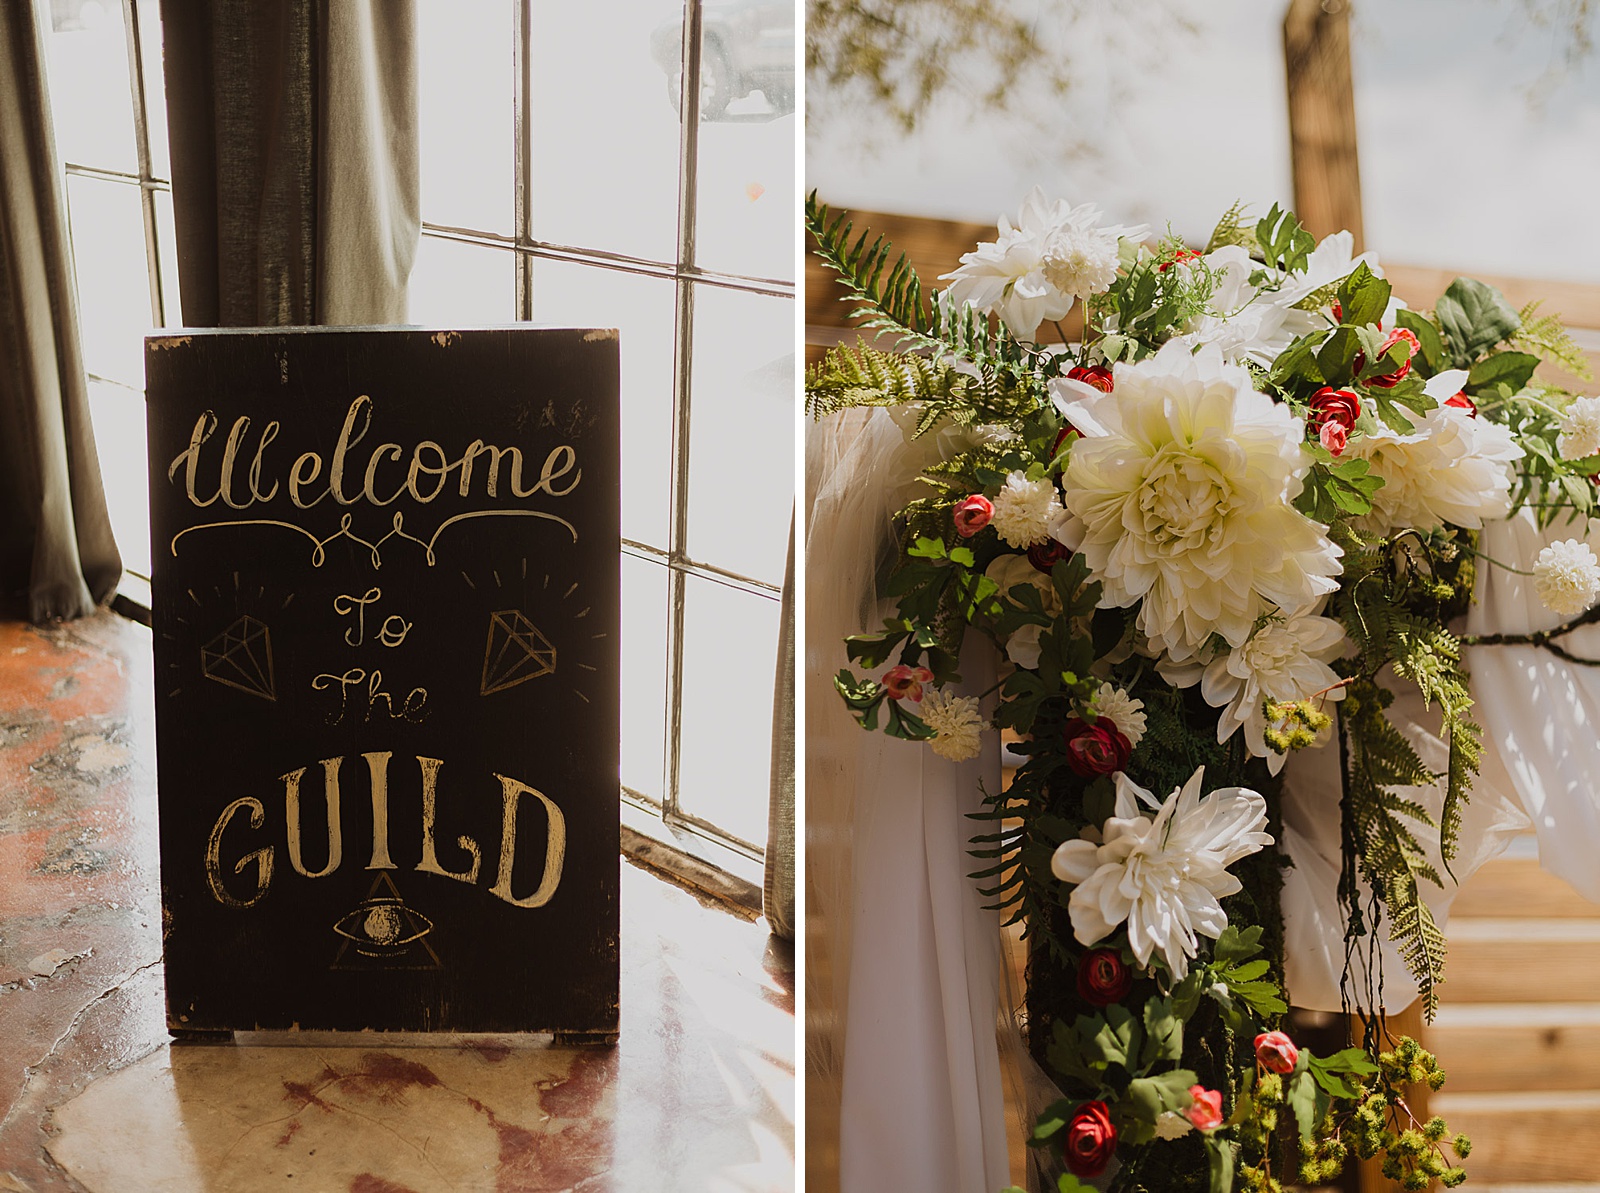 Details from Kansas City Wedding at The Guild Photographed by Caitlyn Cloud Photography